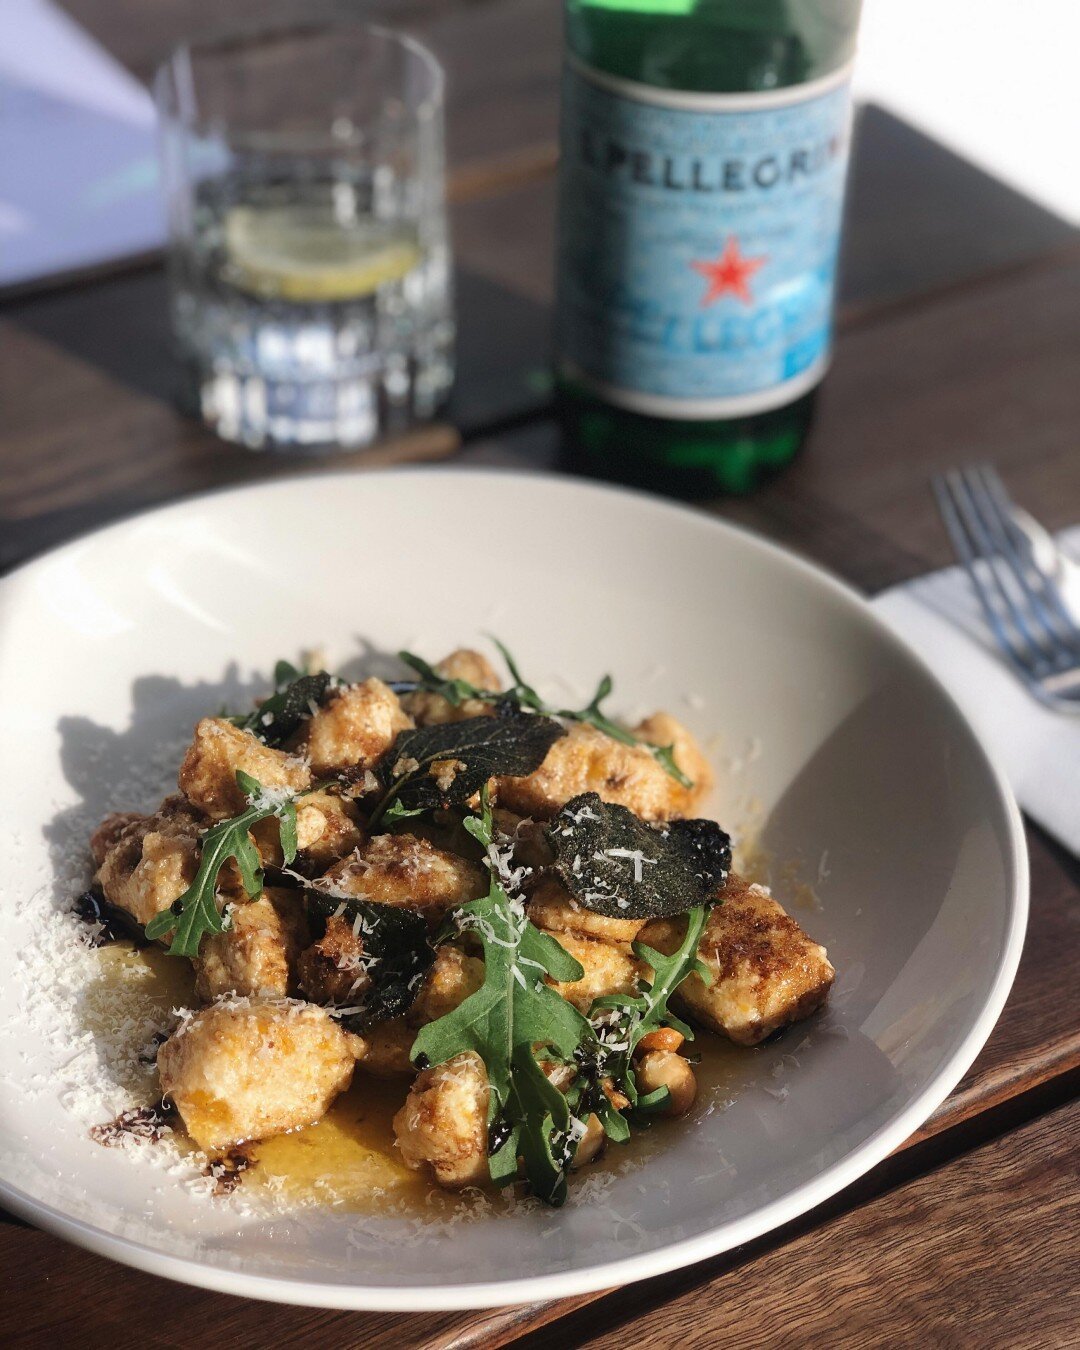 Our new Ricotta Gnocchi dish tastes just as good as it looks 🤩 Try it for lunch today or this weekend! Call ahead to book your table (03) 9135 1699. #mrpercivalcafe #albertparklake #melbournecafe